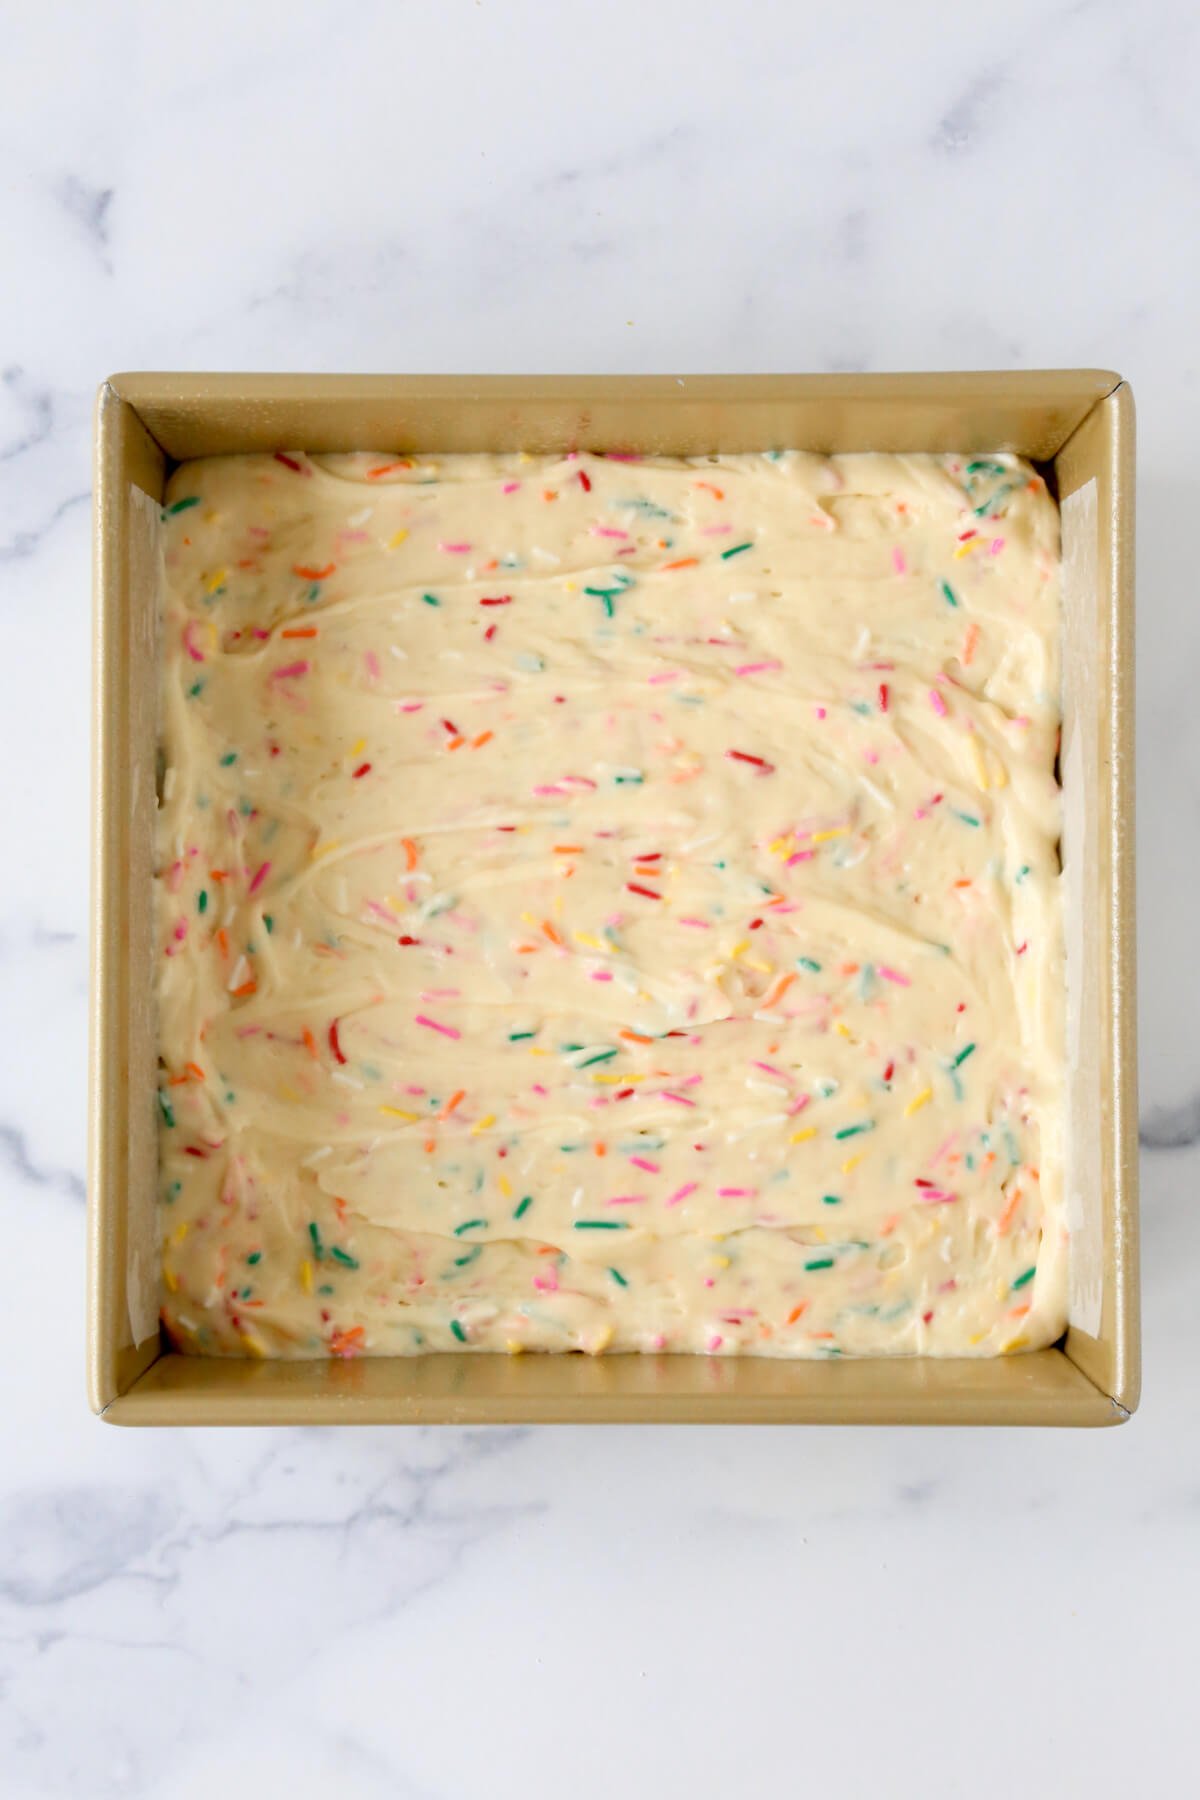 A square gold cake pan with white cake batter with rainbow sprinkles.